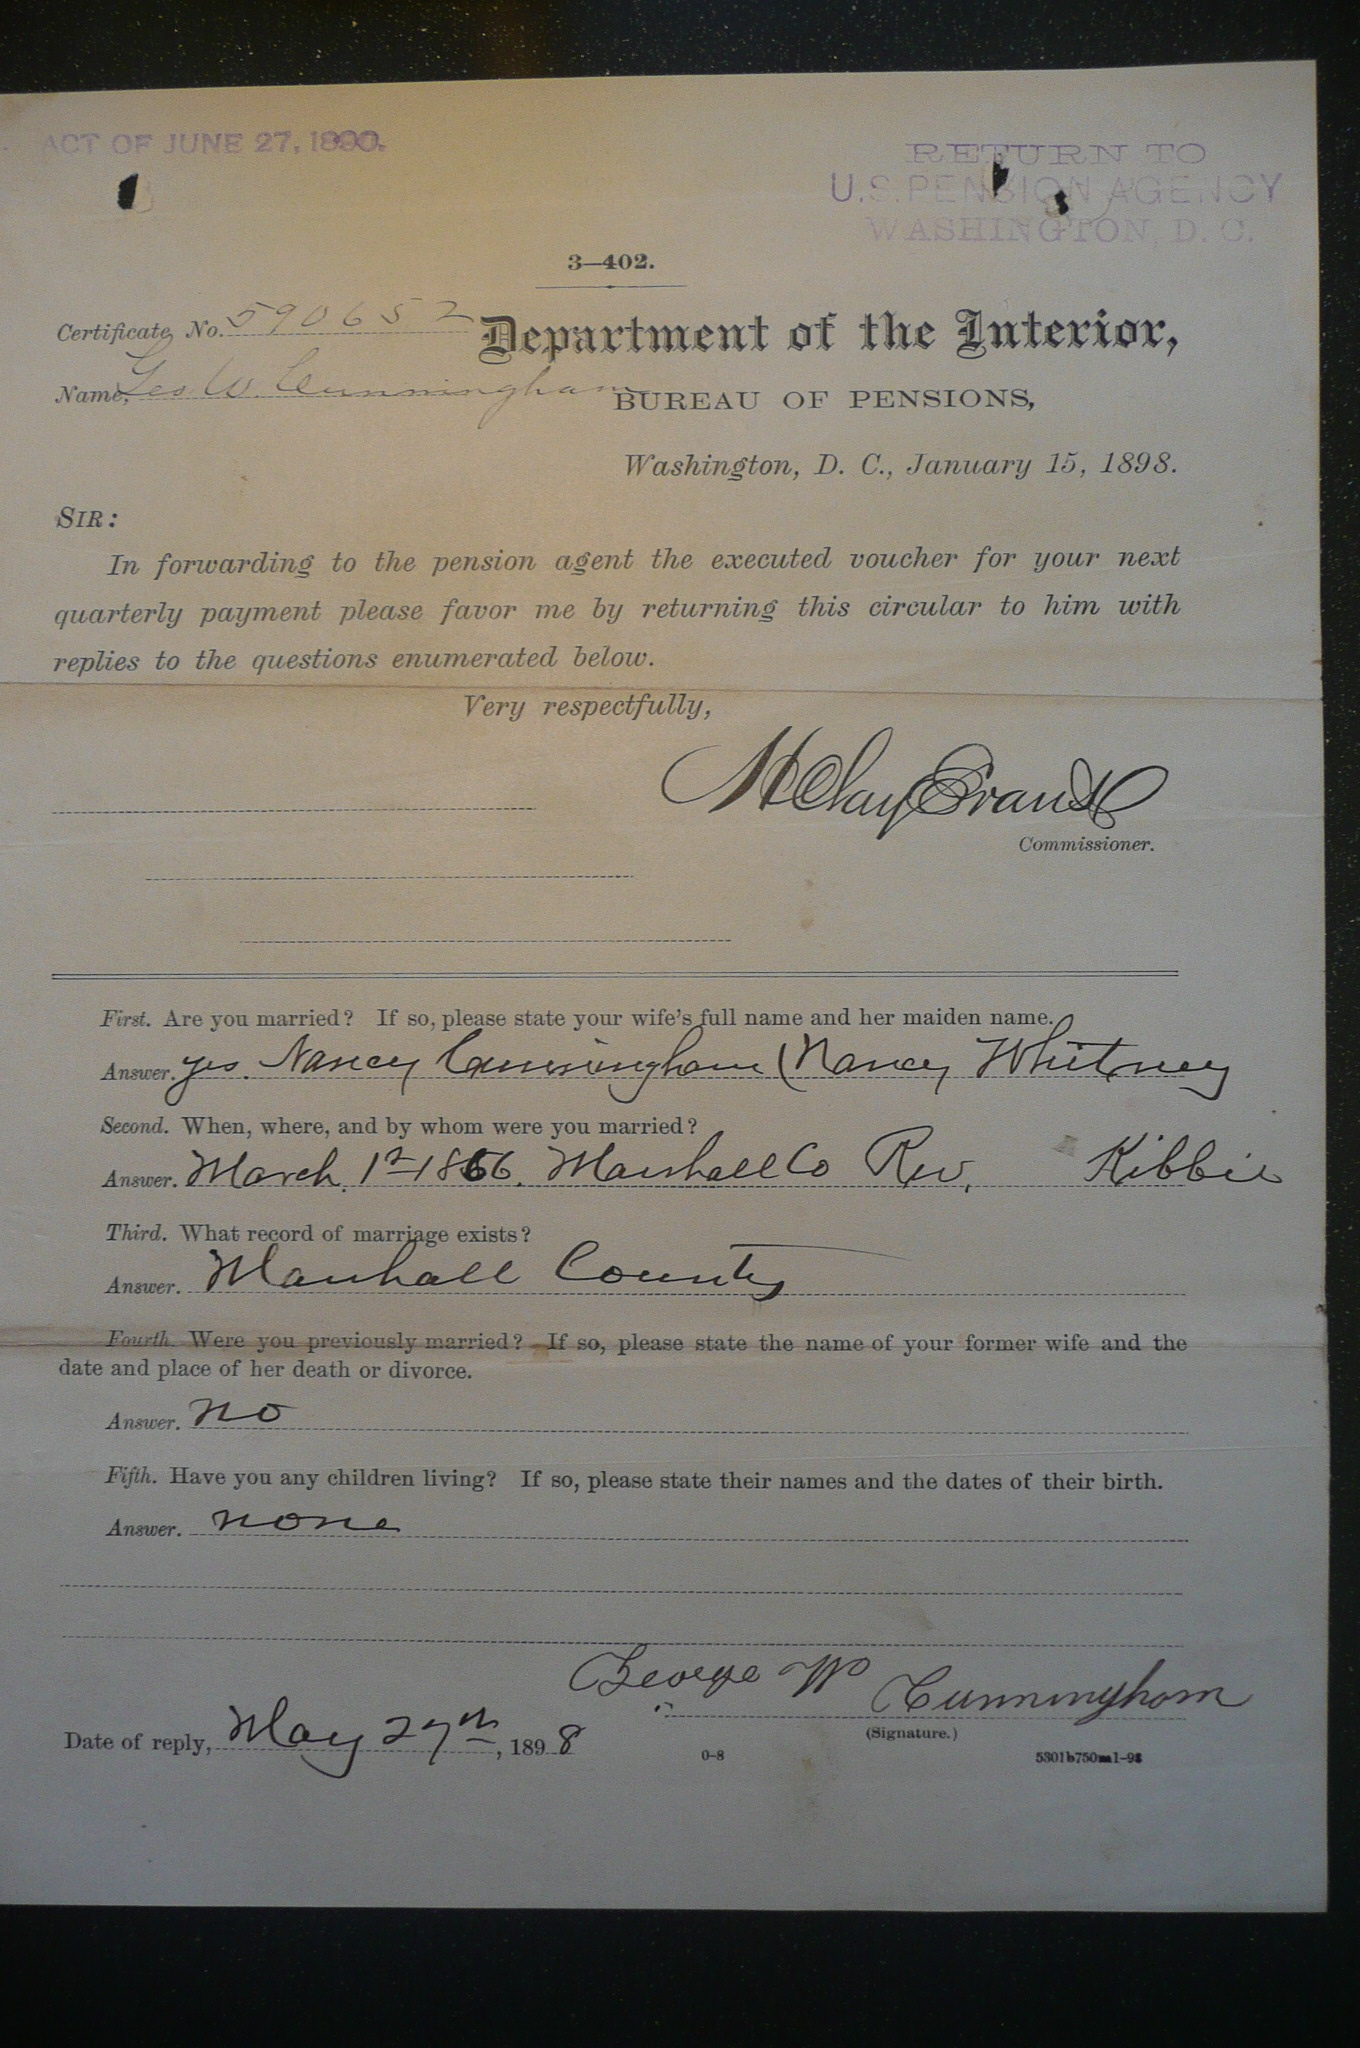 Reply to Inquiry, 1898